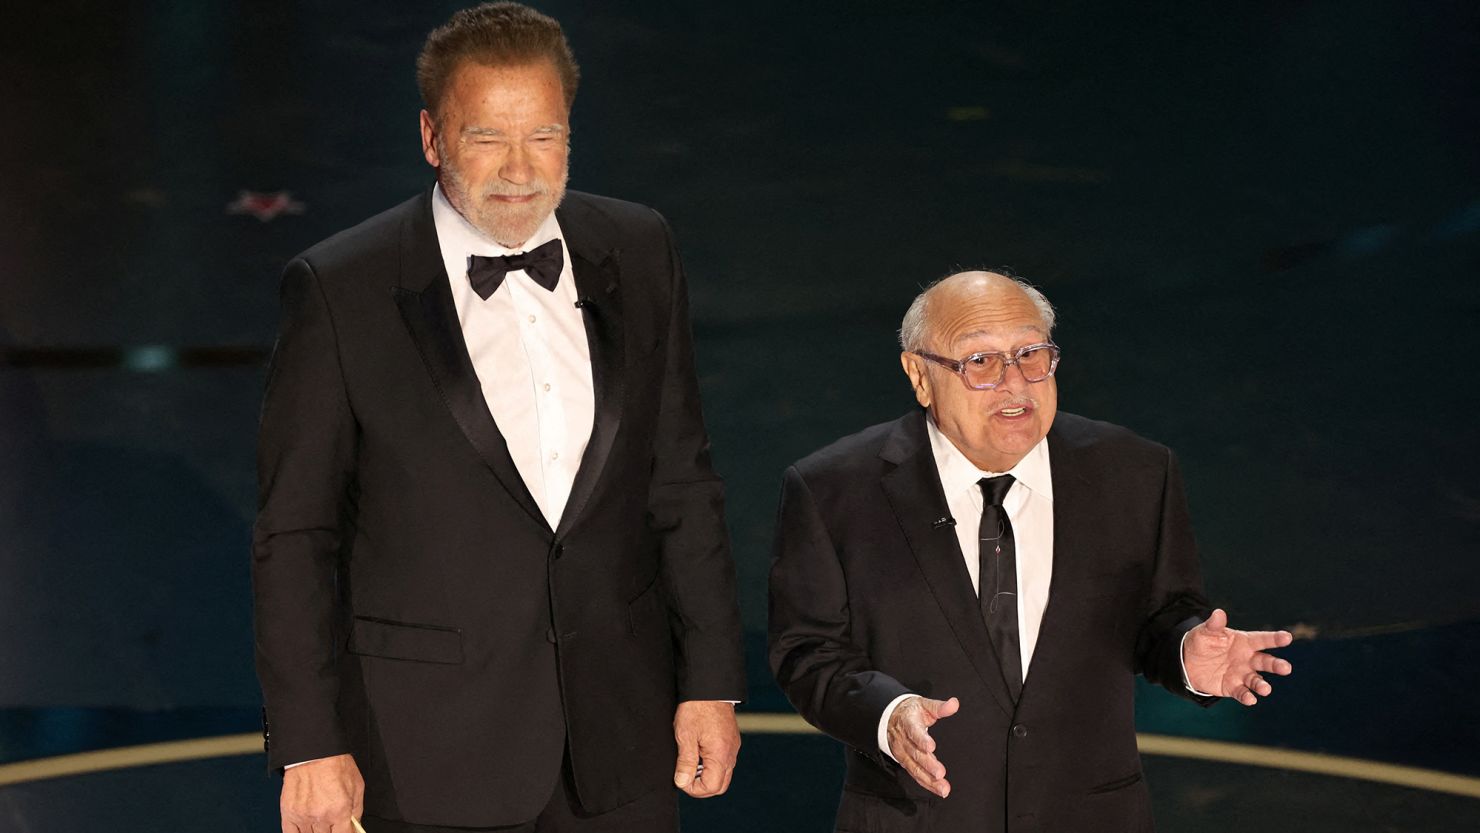 Arnold Schwarzenegger and Danny DeVito at the Oscars on March 10.